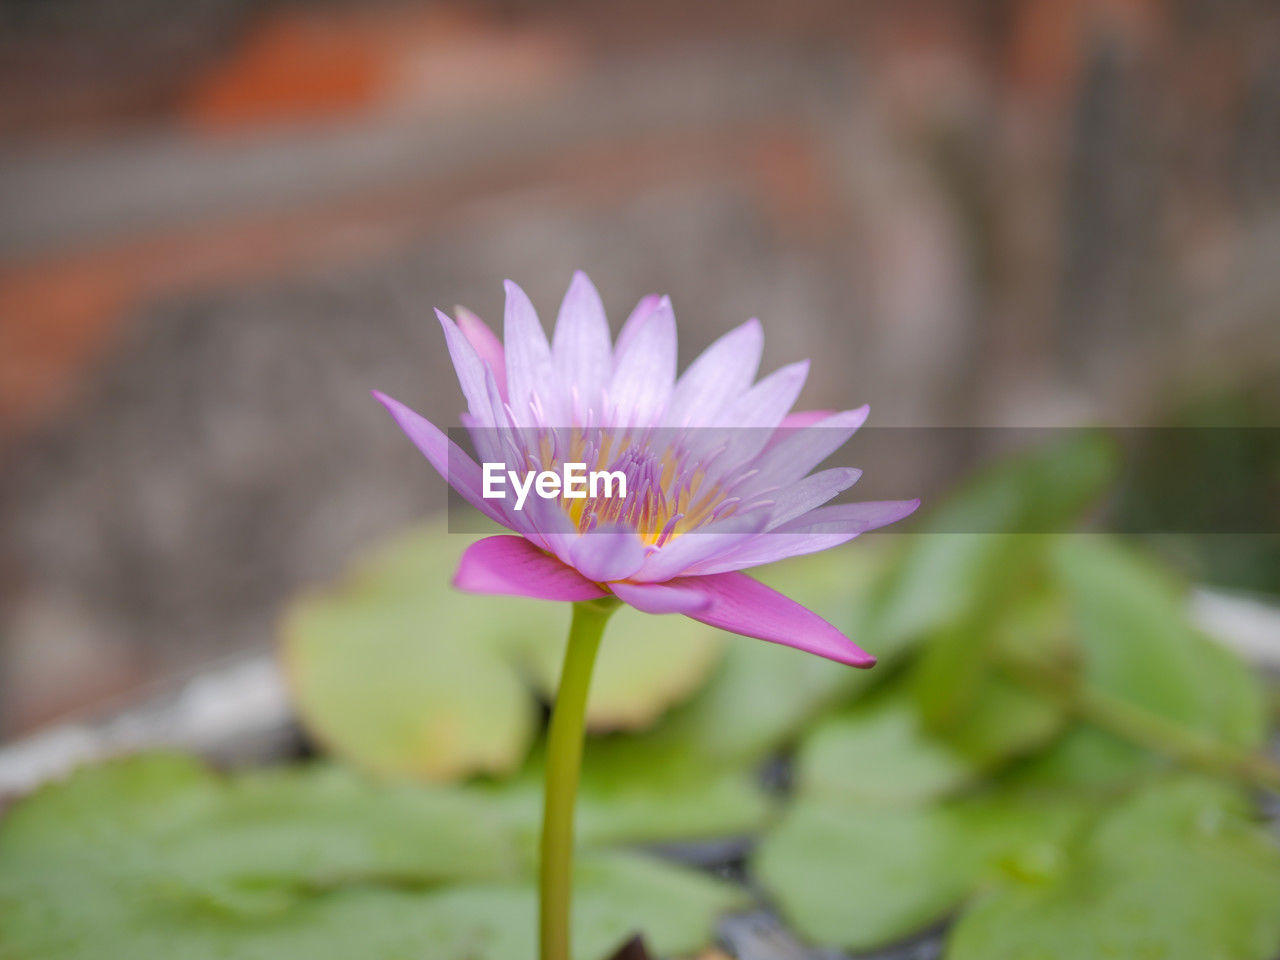 flower, flowering plant, freshness, plant, beauty in nature, water lily, petal, flower head, close-up, fragility, inflorescence, nature, pink, pond, leaf, water, lotus water lily, macro photography, growth, plant part, focus on foreground, no people, purple, lily, blossom, aquatic plant, outdoors, wildflower, day, springtime, pollen, selective focus, botany, yellow, plant stem, green, floating, environment, floating on water, tranquility